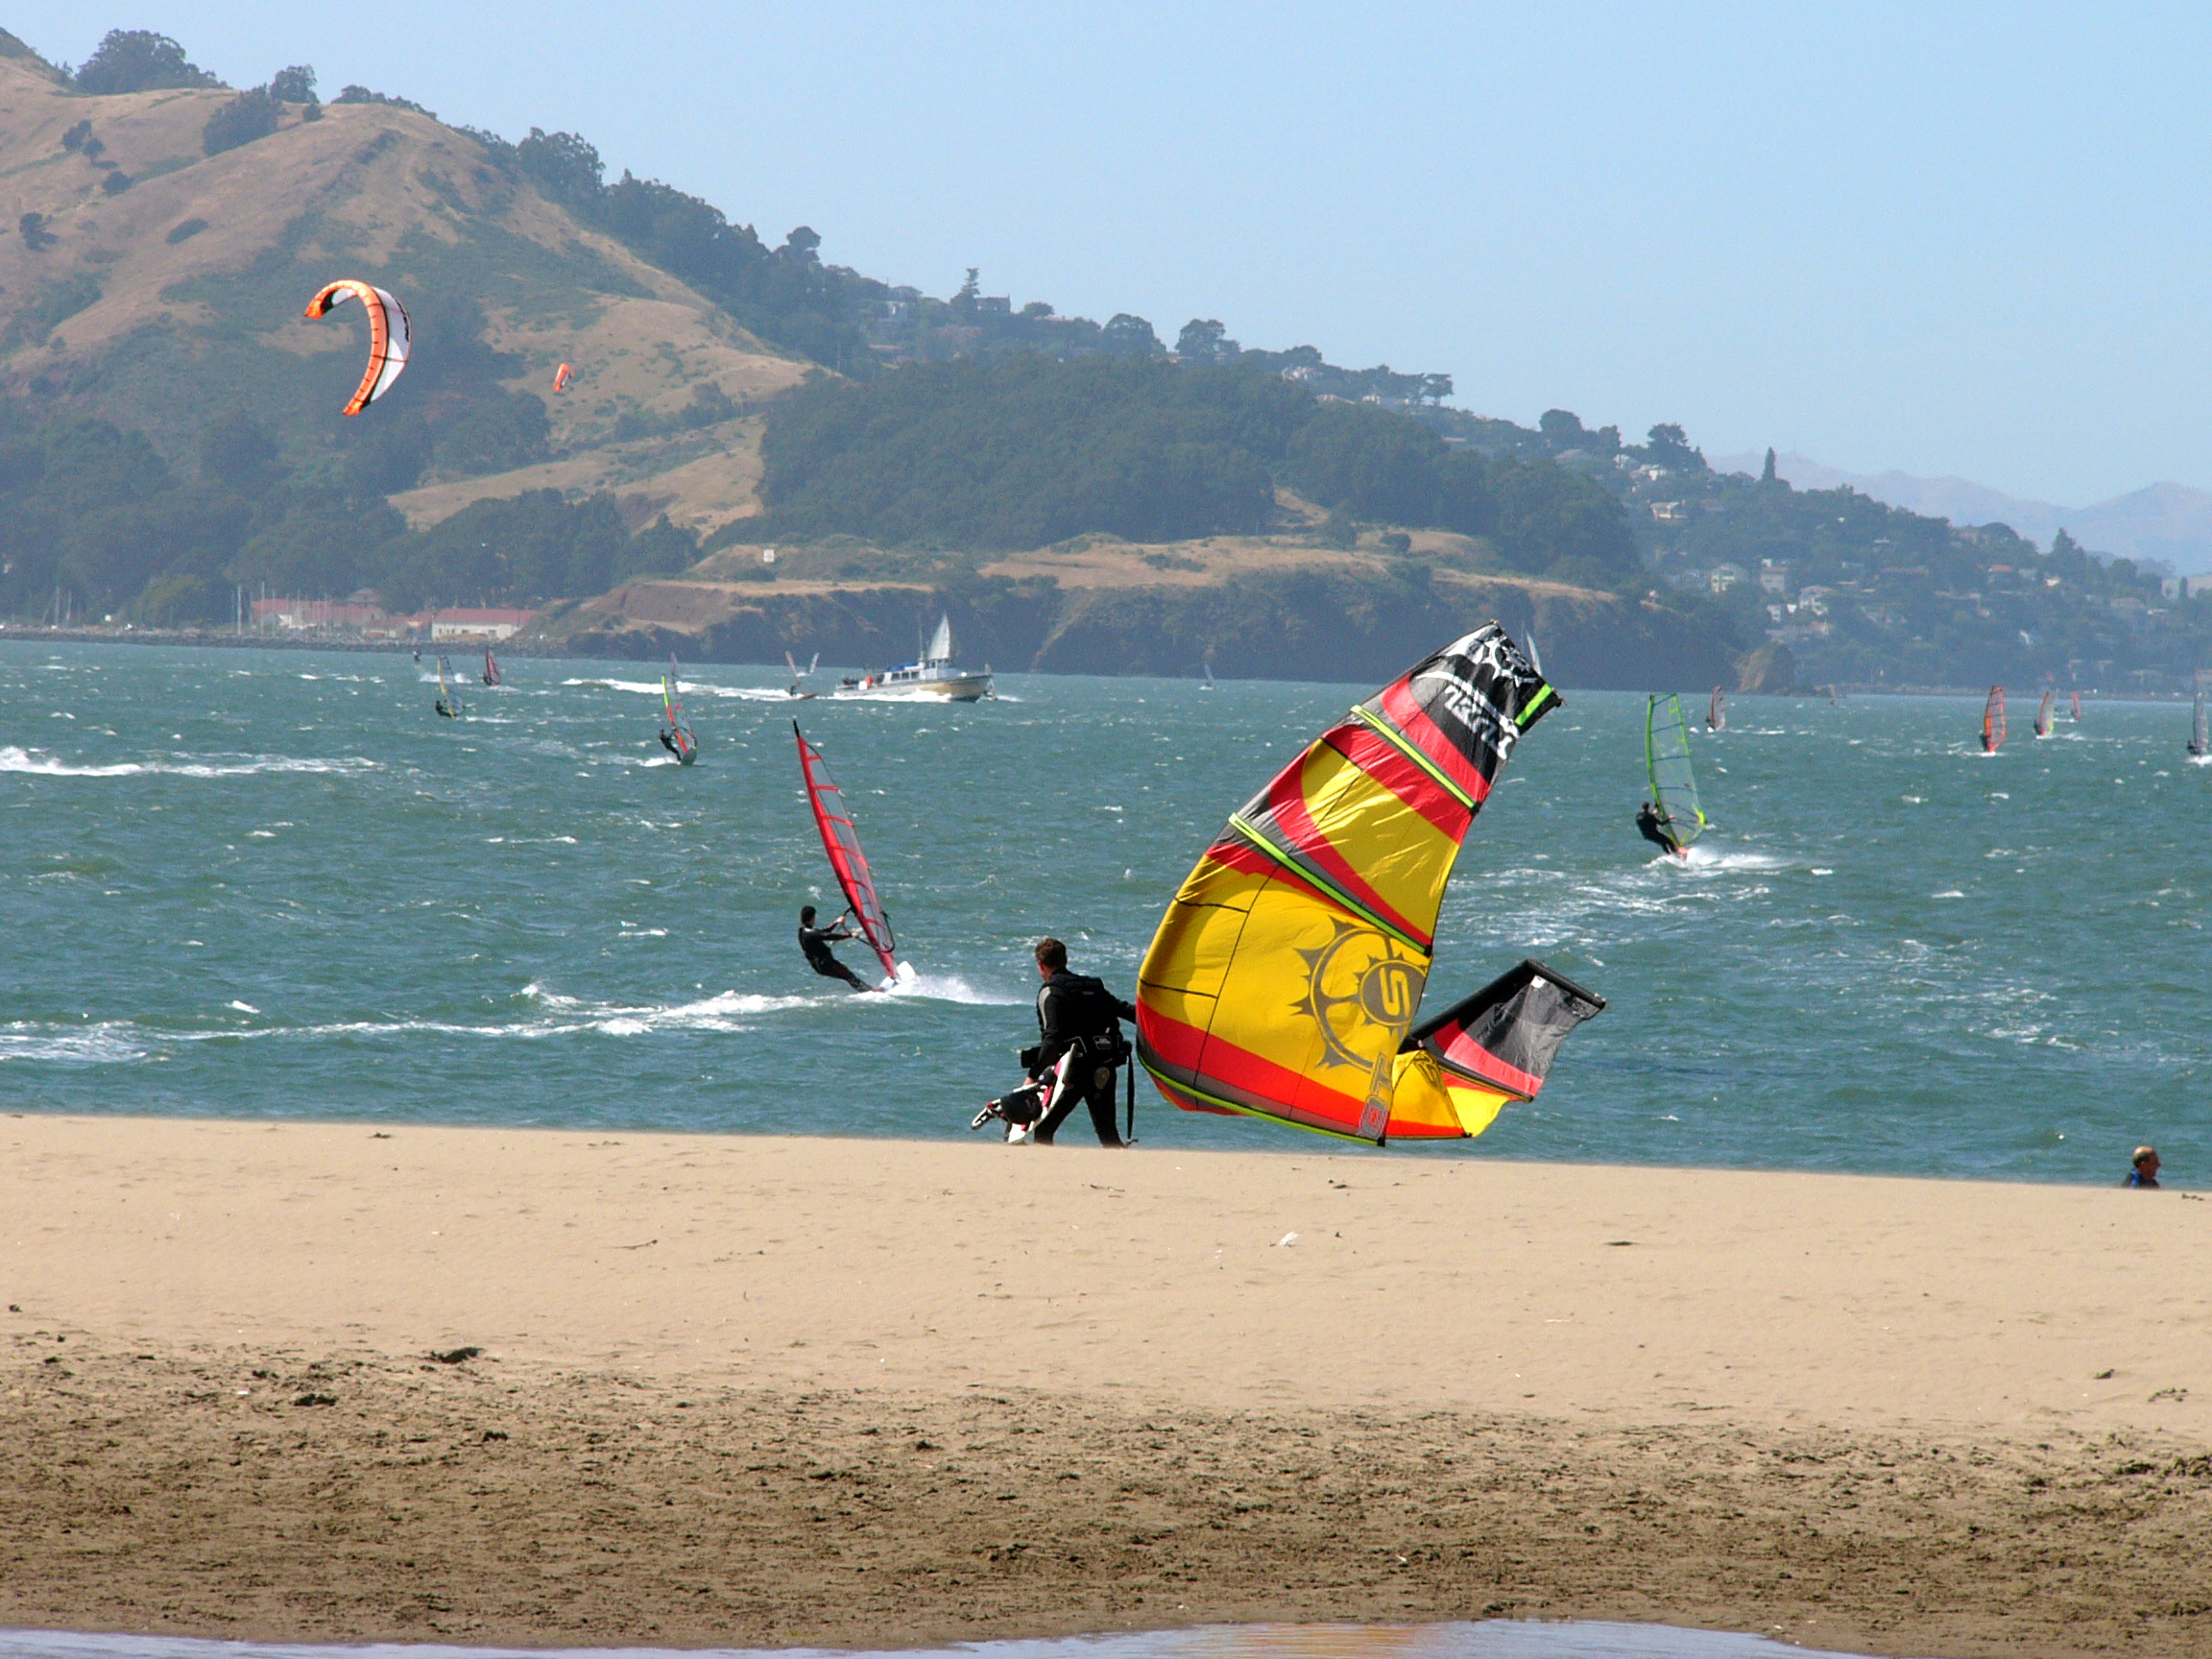 A kite boarder with yellow kite on beach with wind surfers behind on the blue bay.